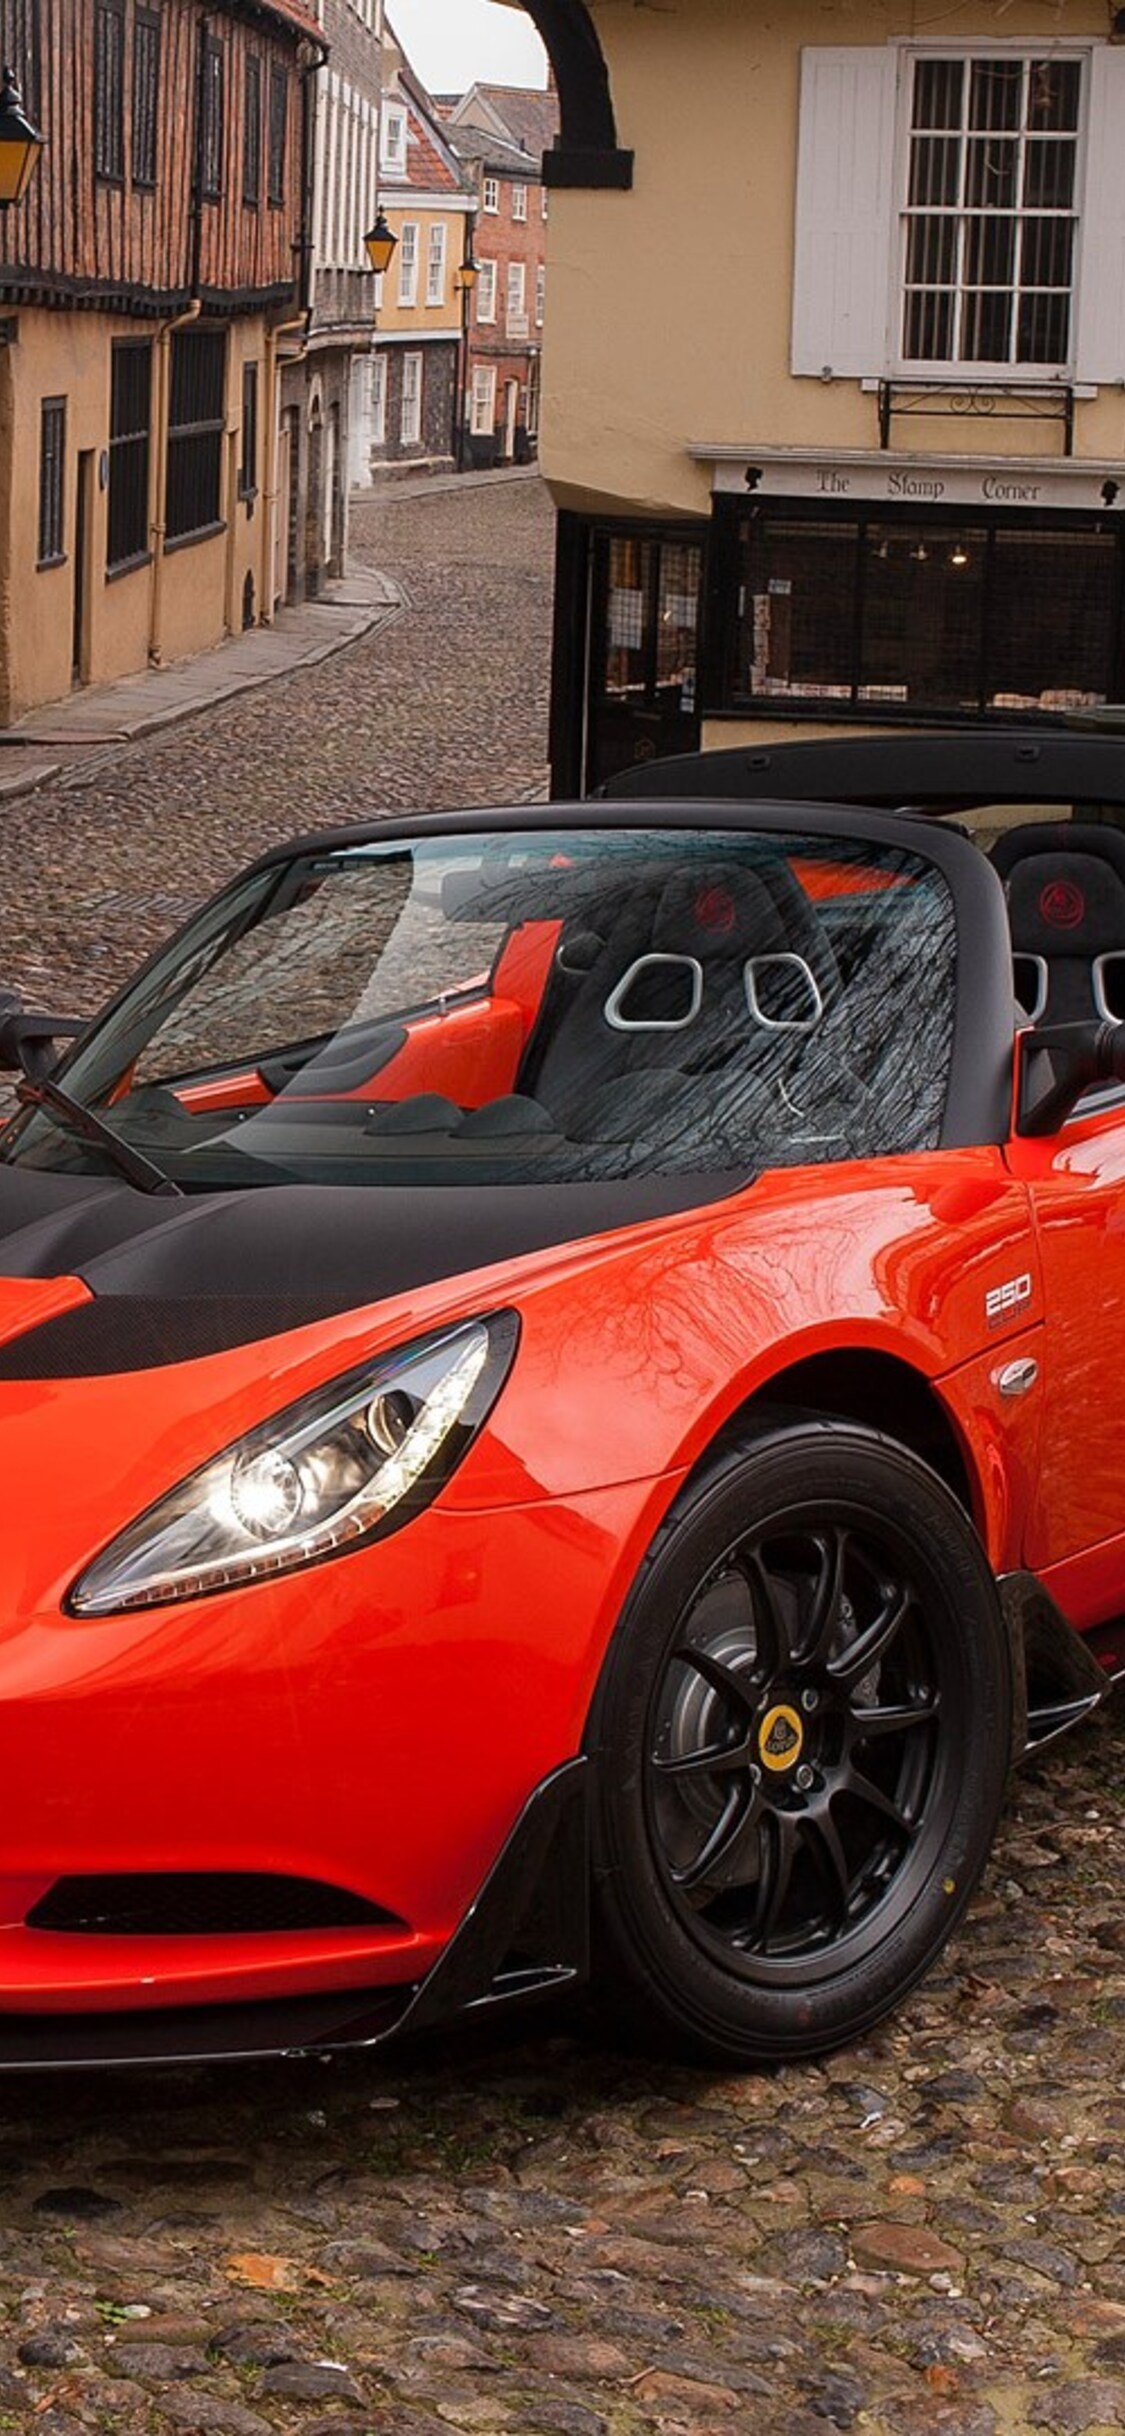 Lotus Elise, Full HD, Iconic roadster, Thrilling driving experience, 1130x2440 HD Handy